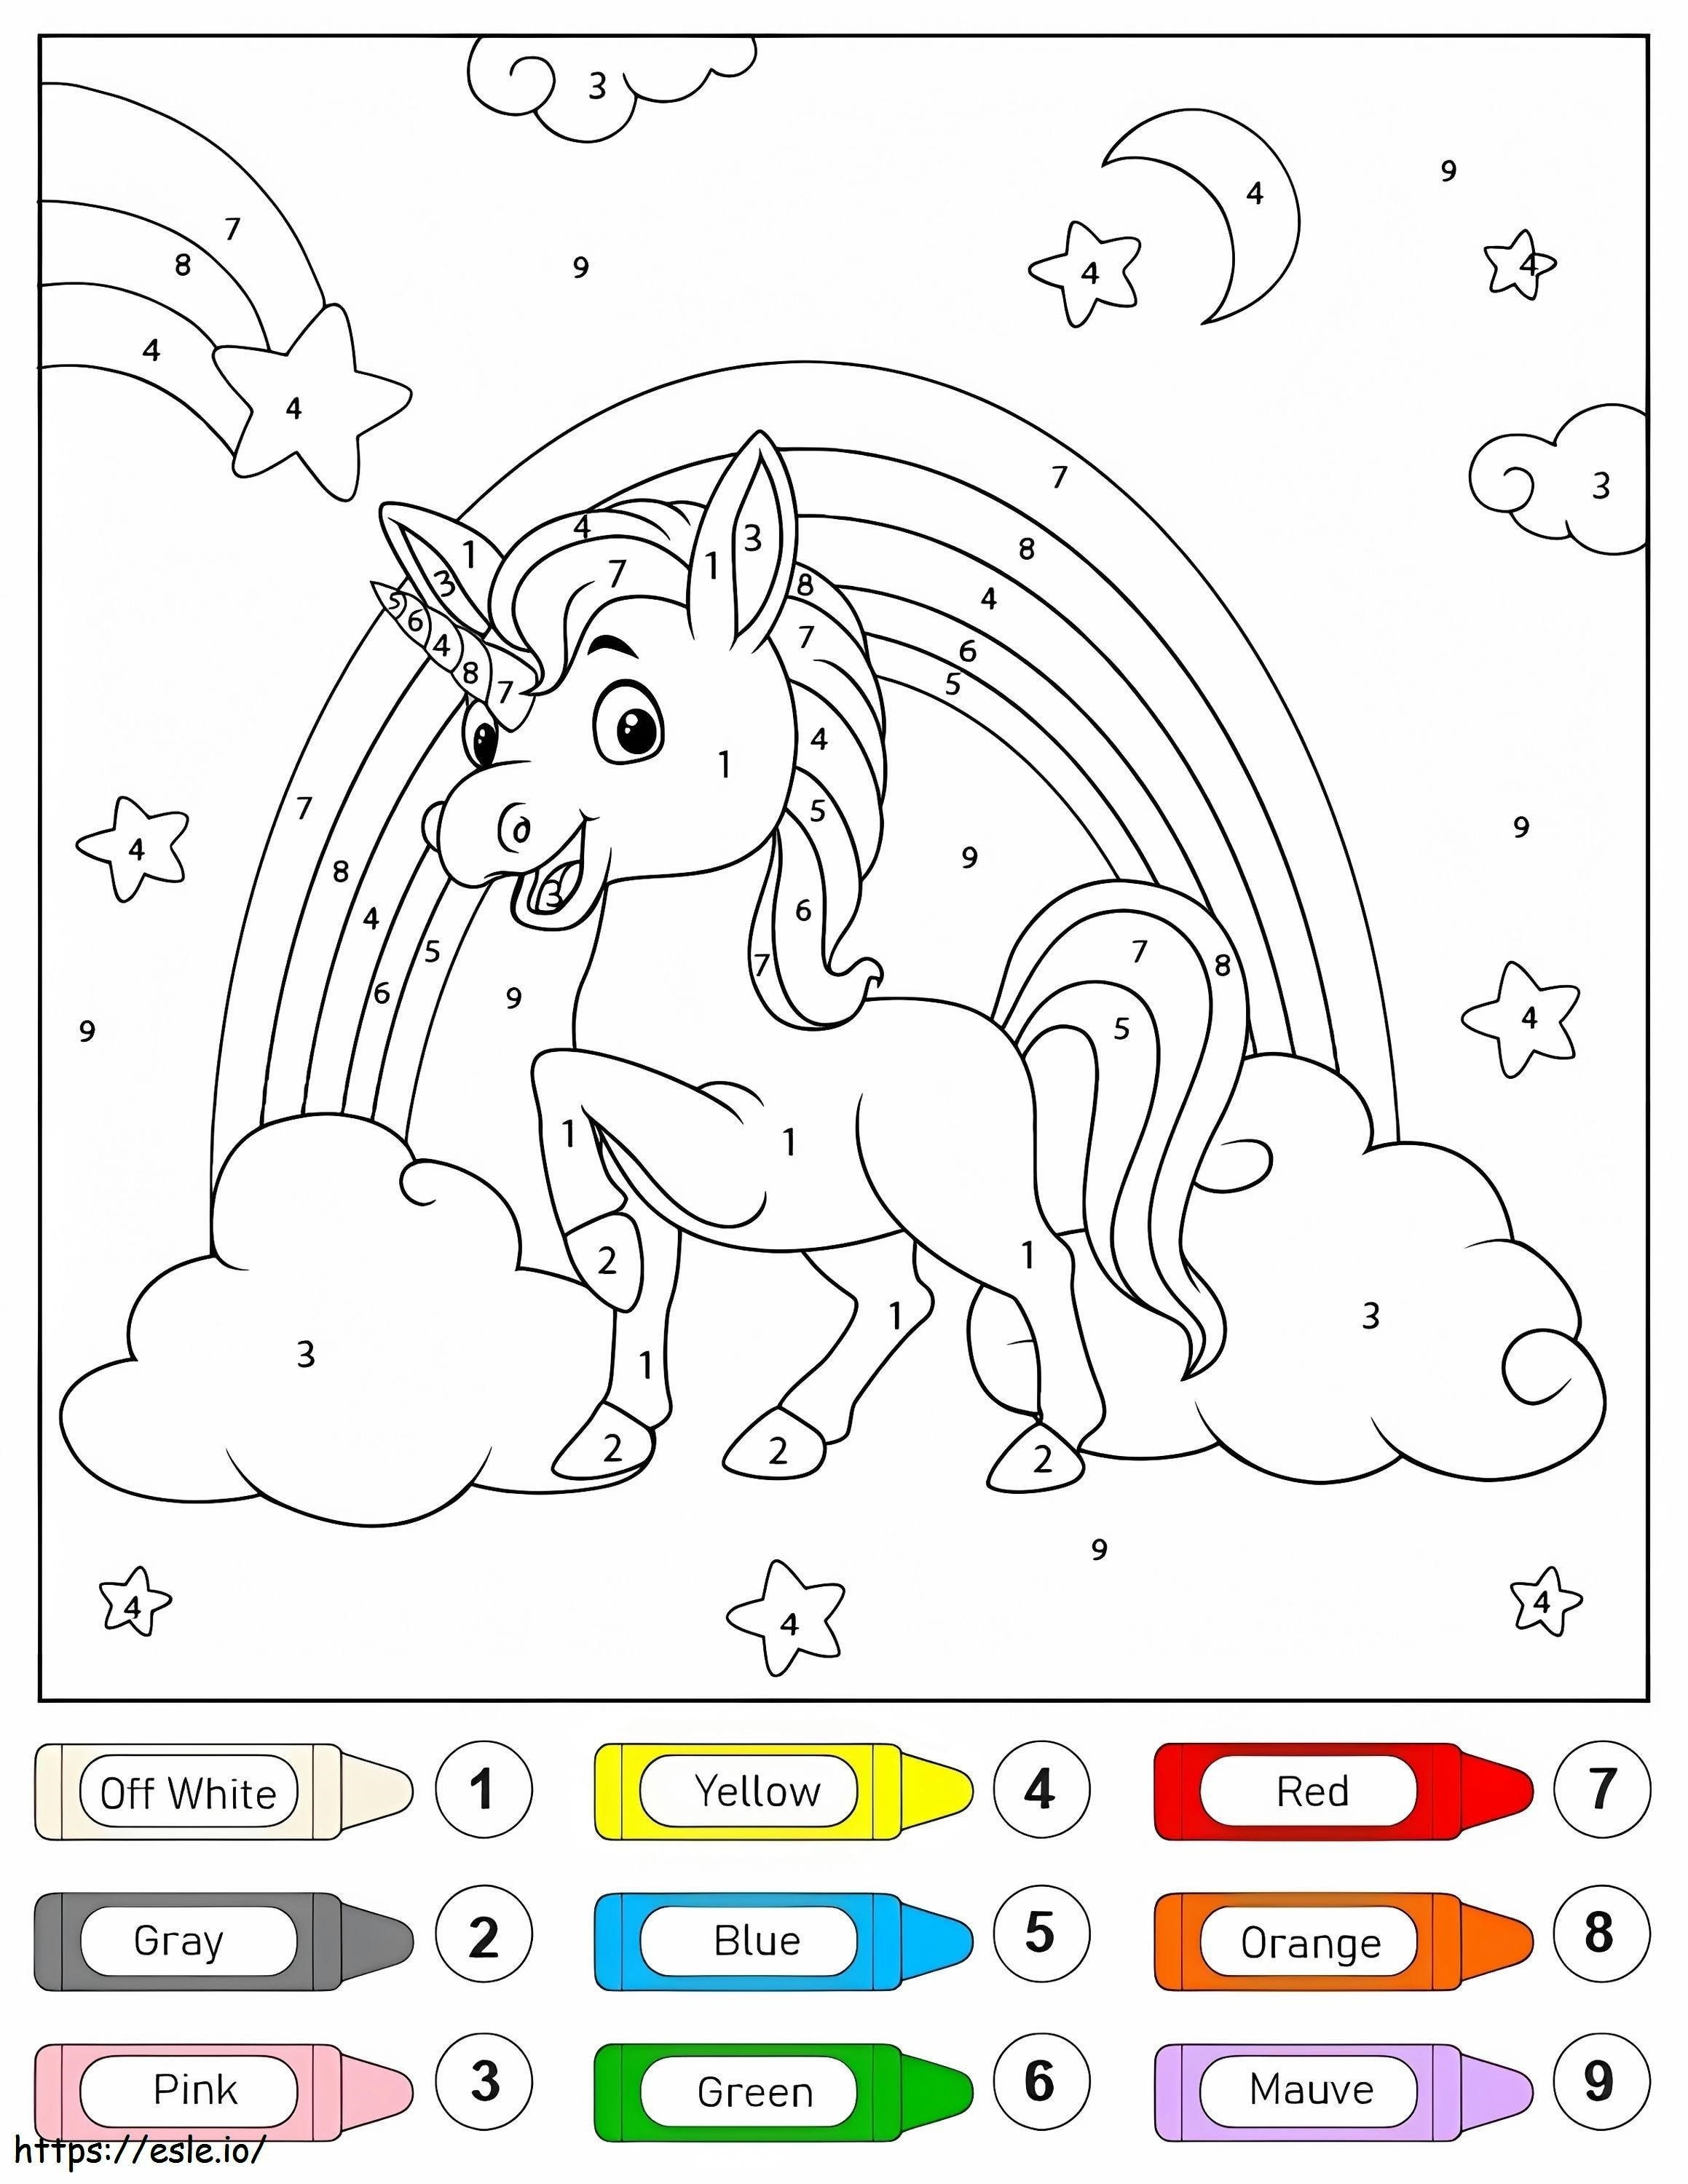 Marching Unicorn Color By Number coloring page